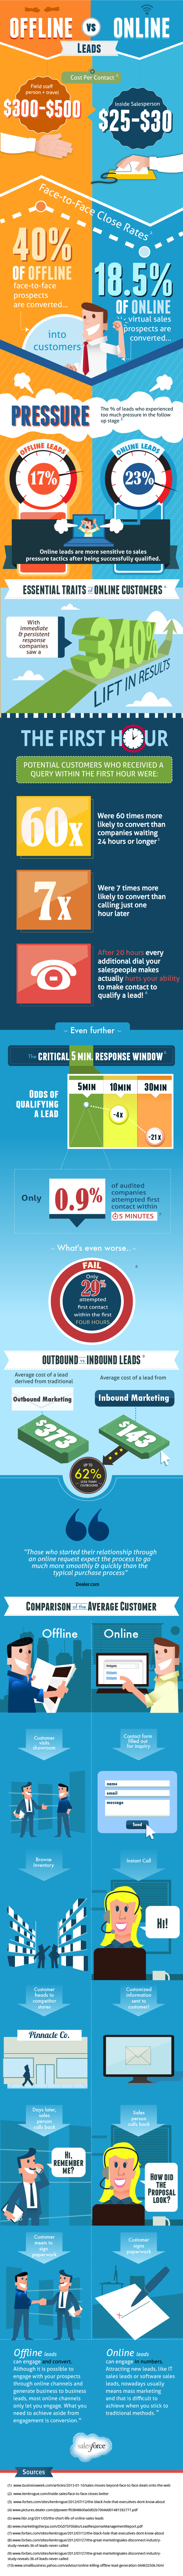 The Difference Between Online, Offline Leads